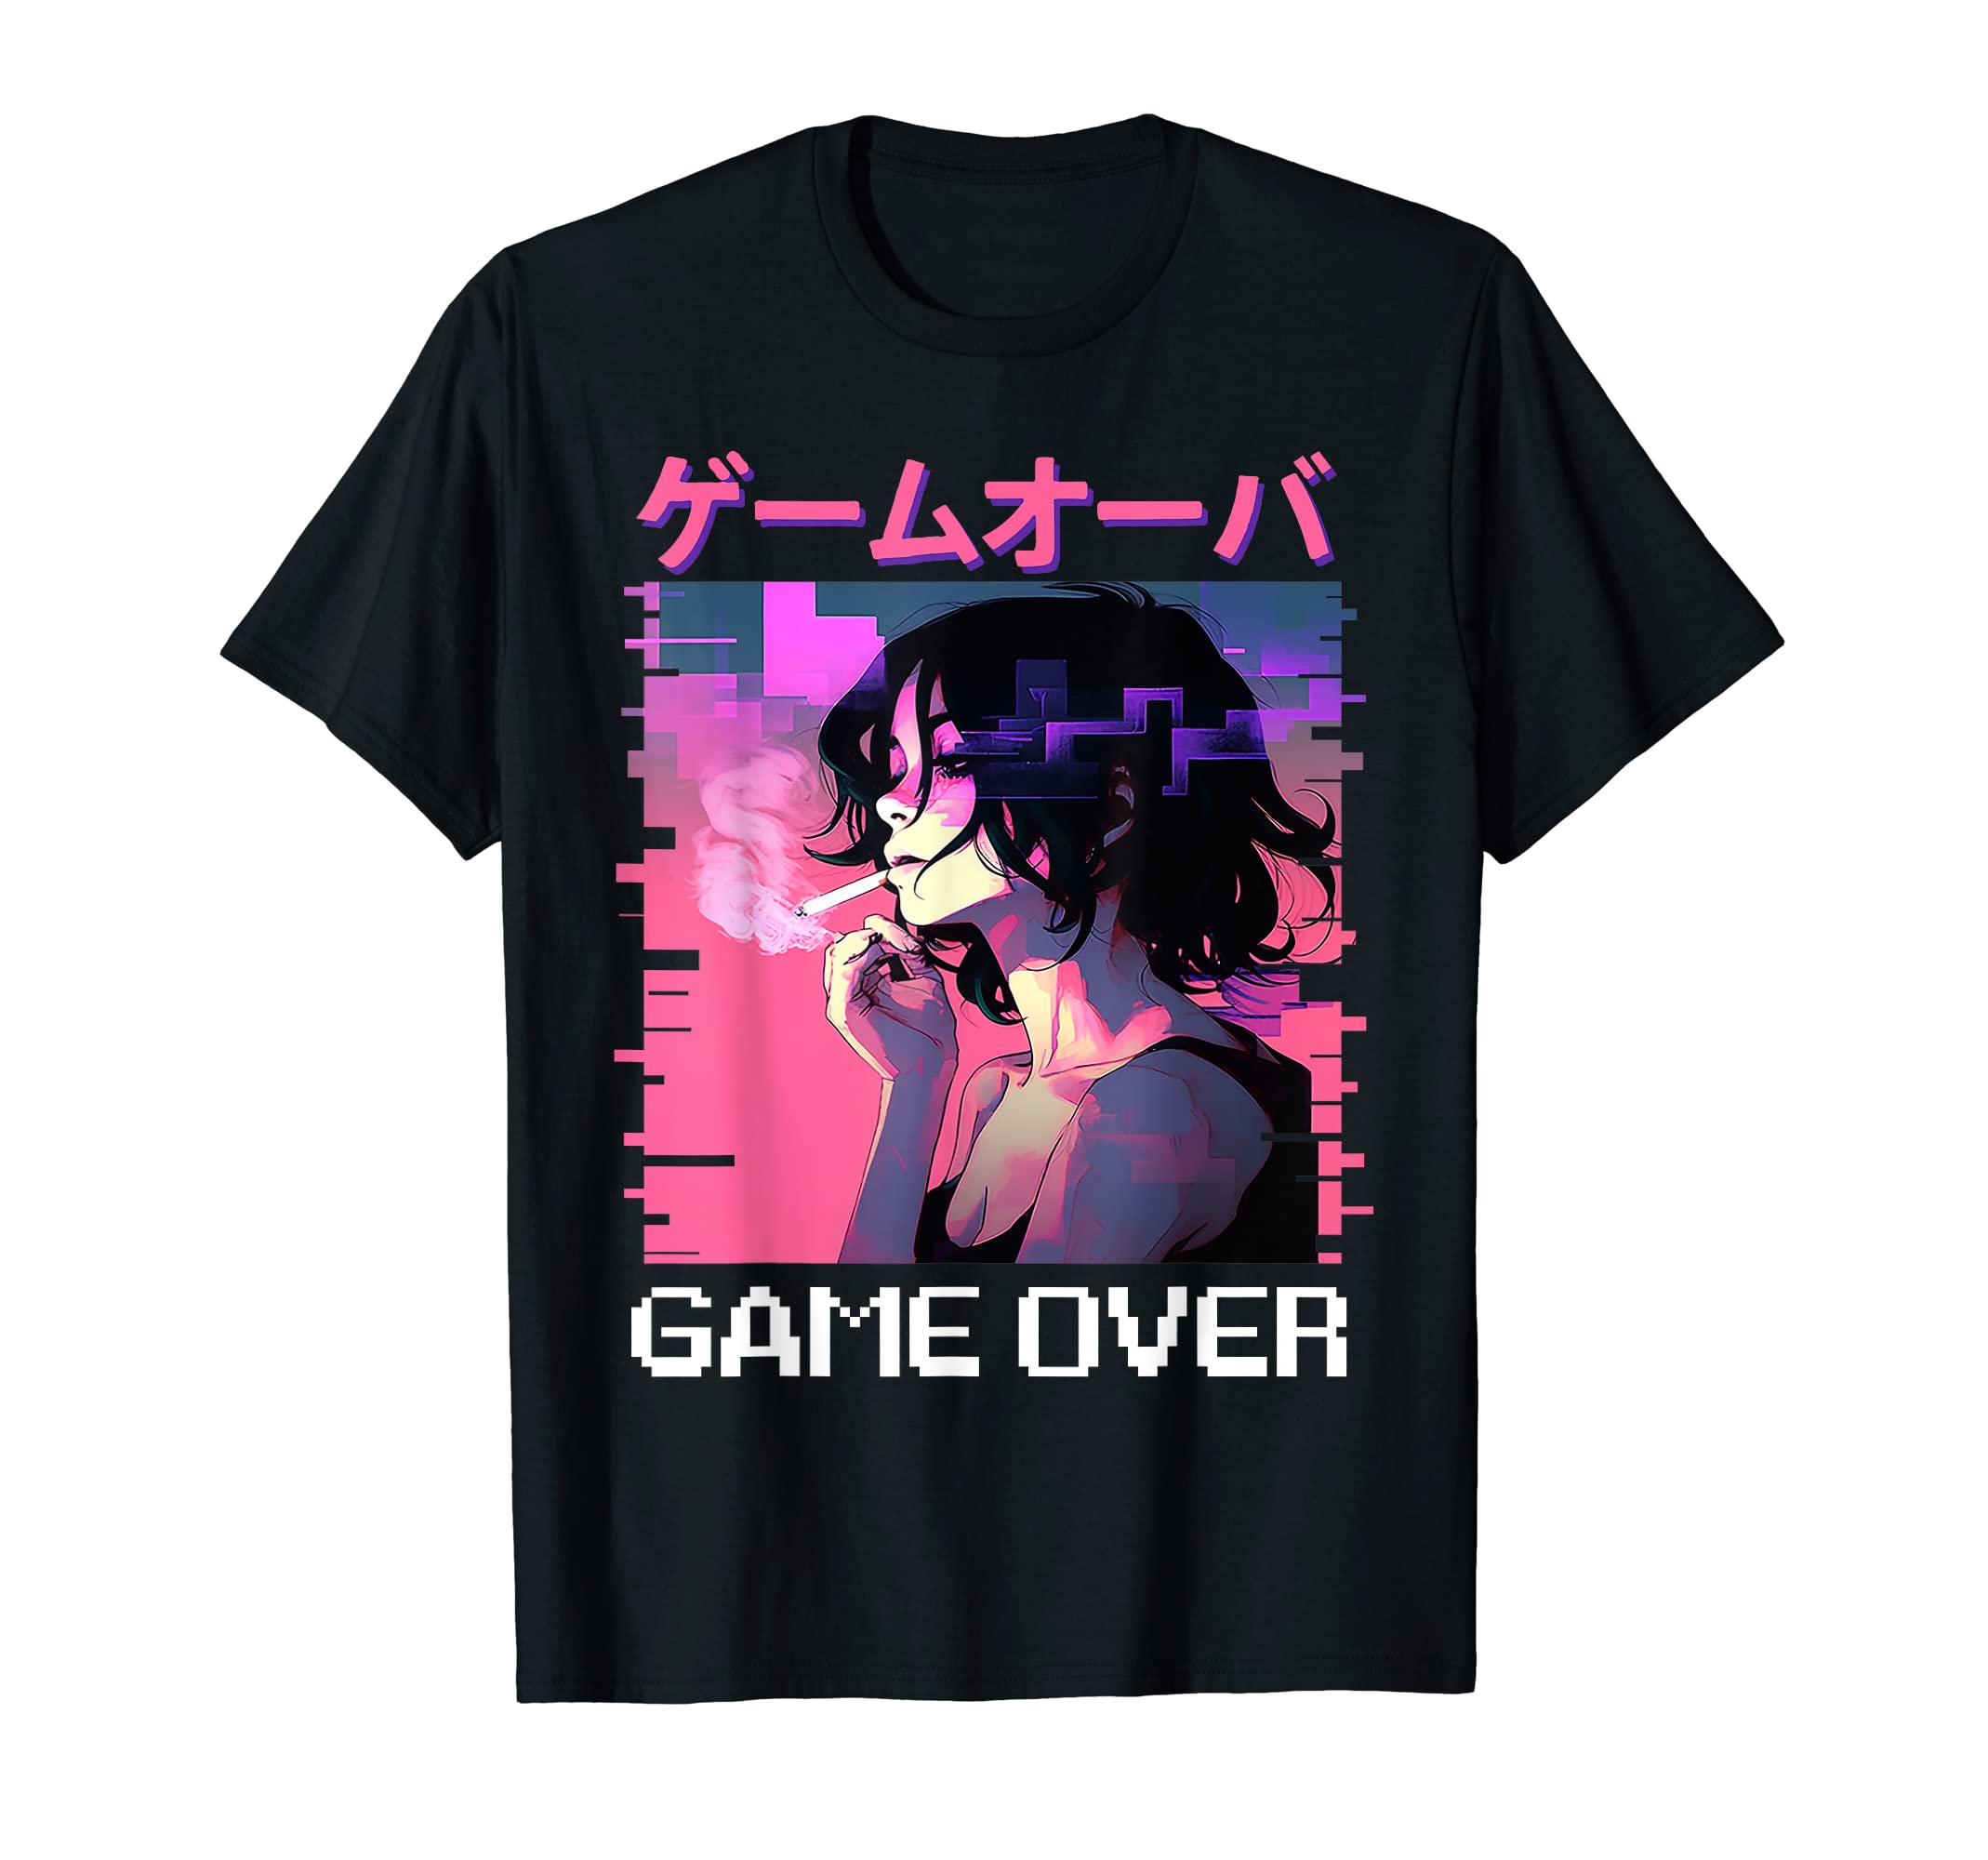 Japanese Oversize Anime Girl T-shirt in White - Usolo Outfitters